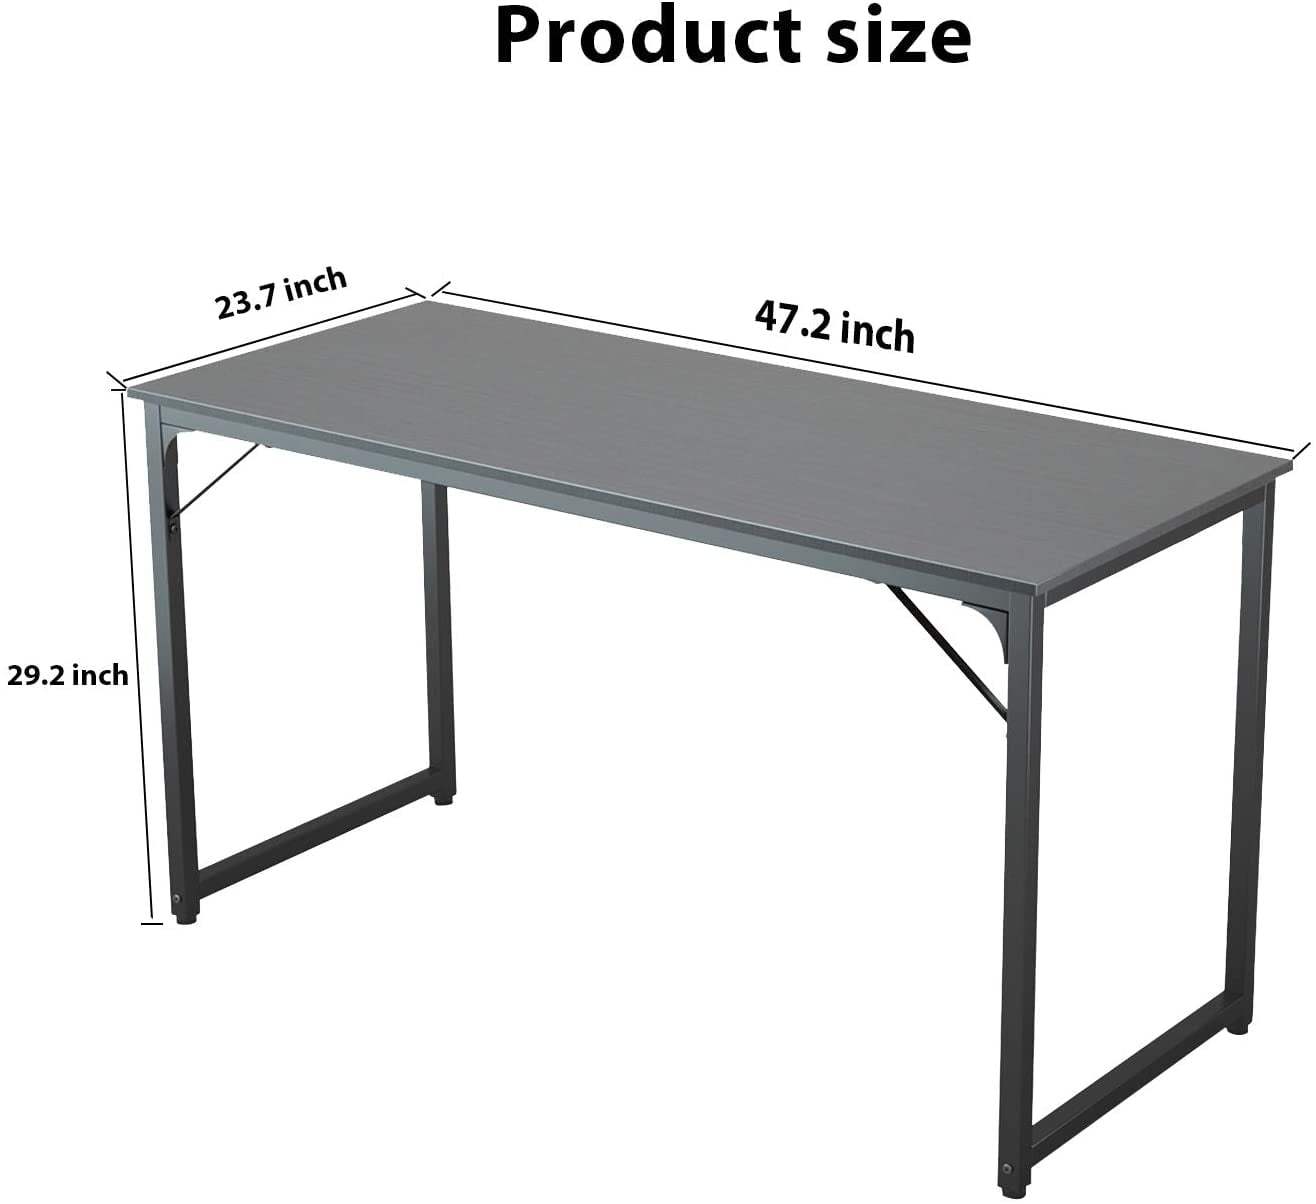 SogesHome Computer Desk 100 x 60 x 75 cm PC Desk Office Desk Workstation for Home Office Use Writing Table,Dinner Table Conference Table,AC3DW-100-SH 